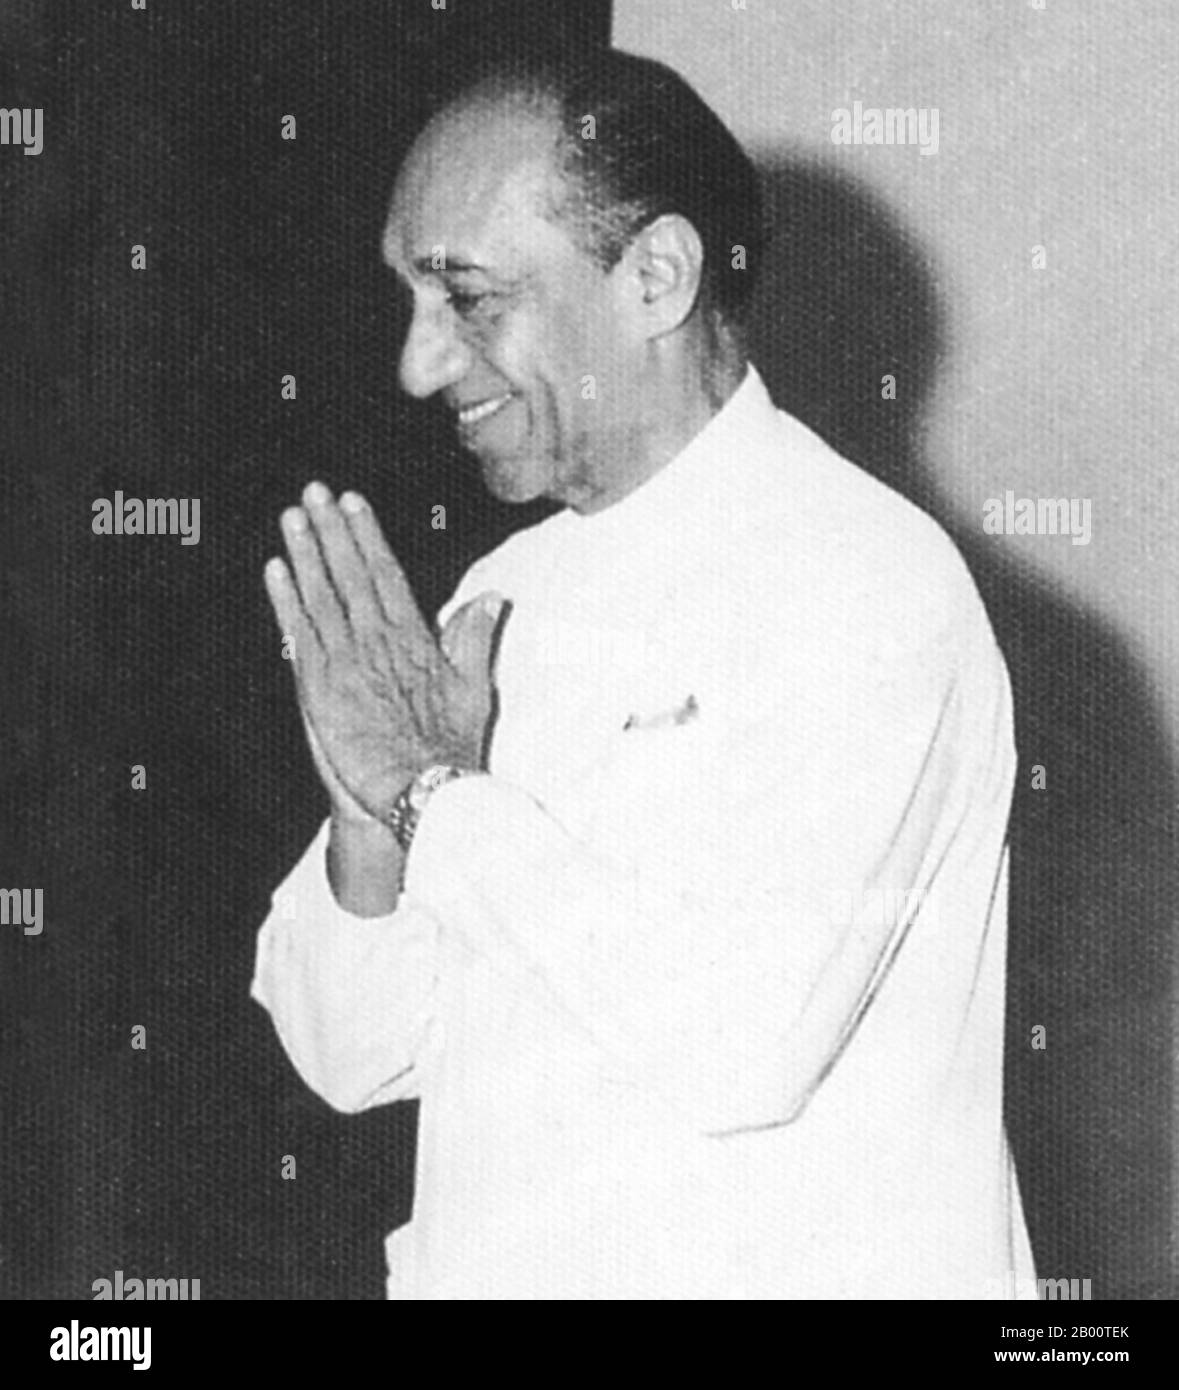 Sri Lanka: Junius Richard Jayewardene (September 17, 1906 – November 1, 1996).  Junius Richard Jayewardene (September 17, 1906 – November 1, 1996), famously abbreviated in Sri Lanka as JR, was the first executive President of Sri Lanka, serving from 1978 till 1989. He was a leader of the nationalist movement in Ceylon (now Sri Lanka) who served in a variety of cabinet positions in the decades following independence. Before taking over the newly created executive presidency, he served as the Prime Minister of Sri Lanka between 1977 and 1978. Stock Photo